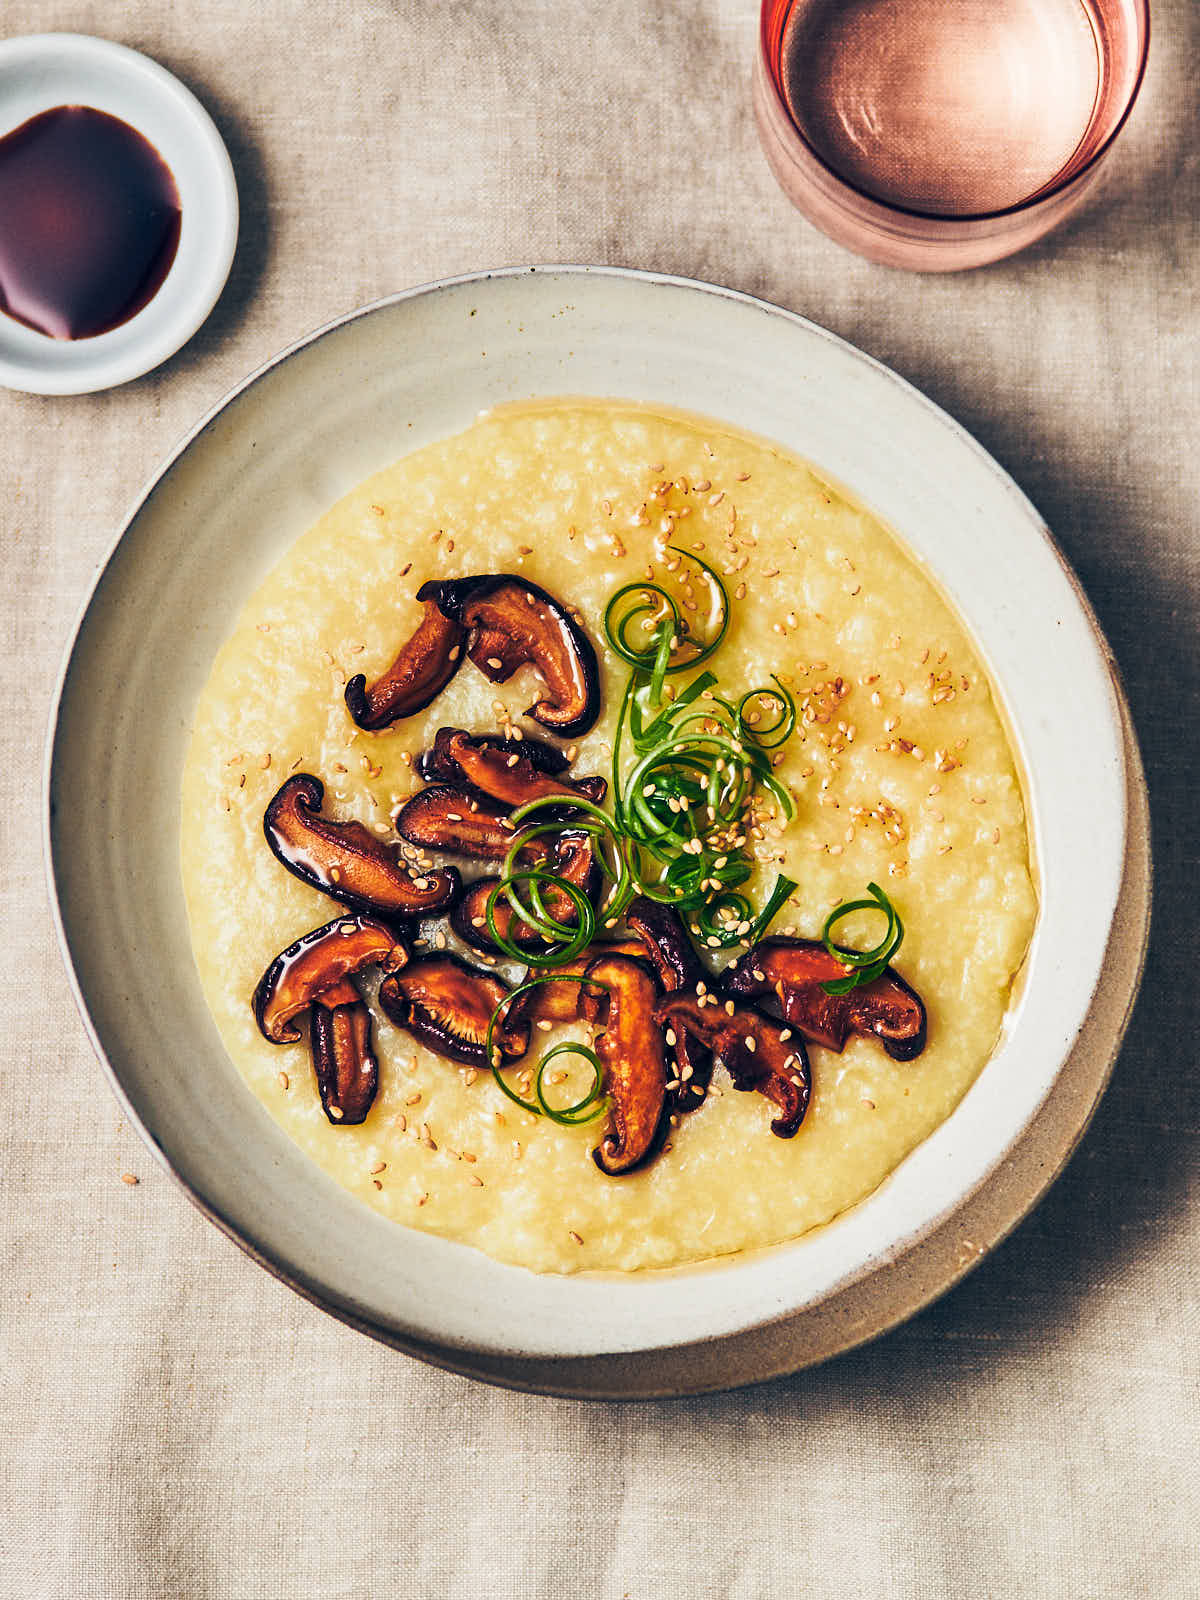 A bowl of congee with sauteed mushrooms, toasted sesame oil, sesame seeds, and scallions on top with a small dish of soy sauce on the side.